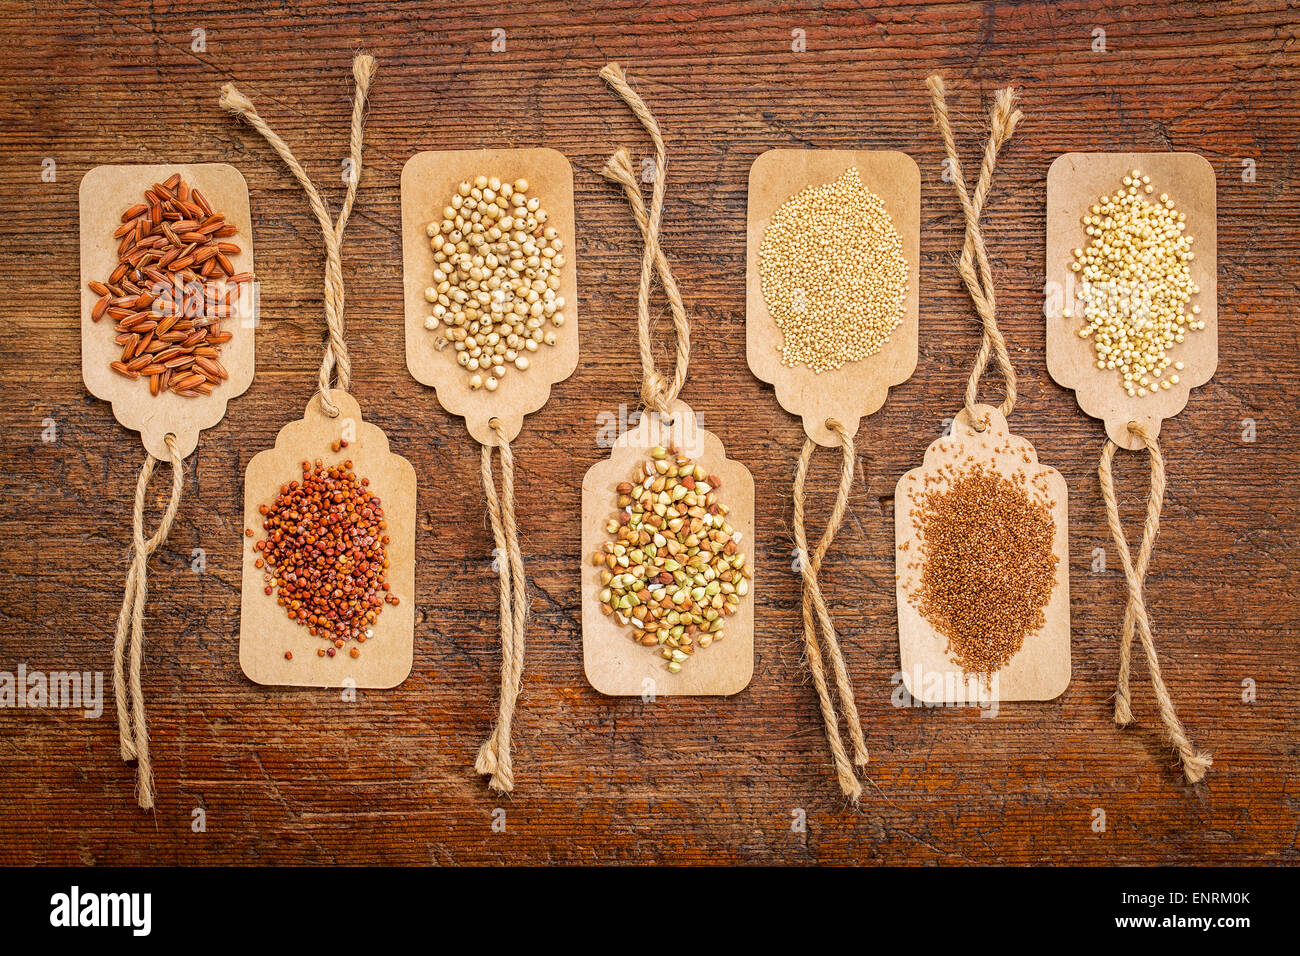 abstract of healthy, gluten free grains (quinoa, sorghum, brown rice, teff, buckwheat, amaranth, millet) - top view of paper pri Stock Photo